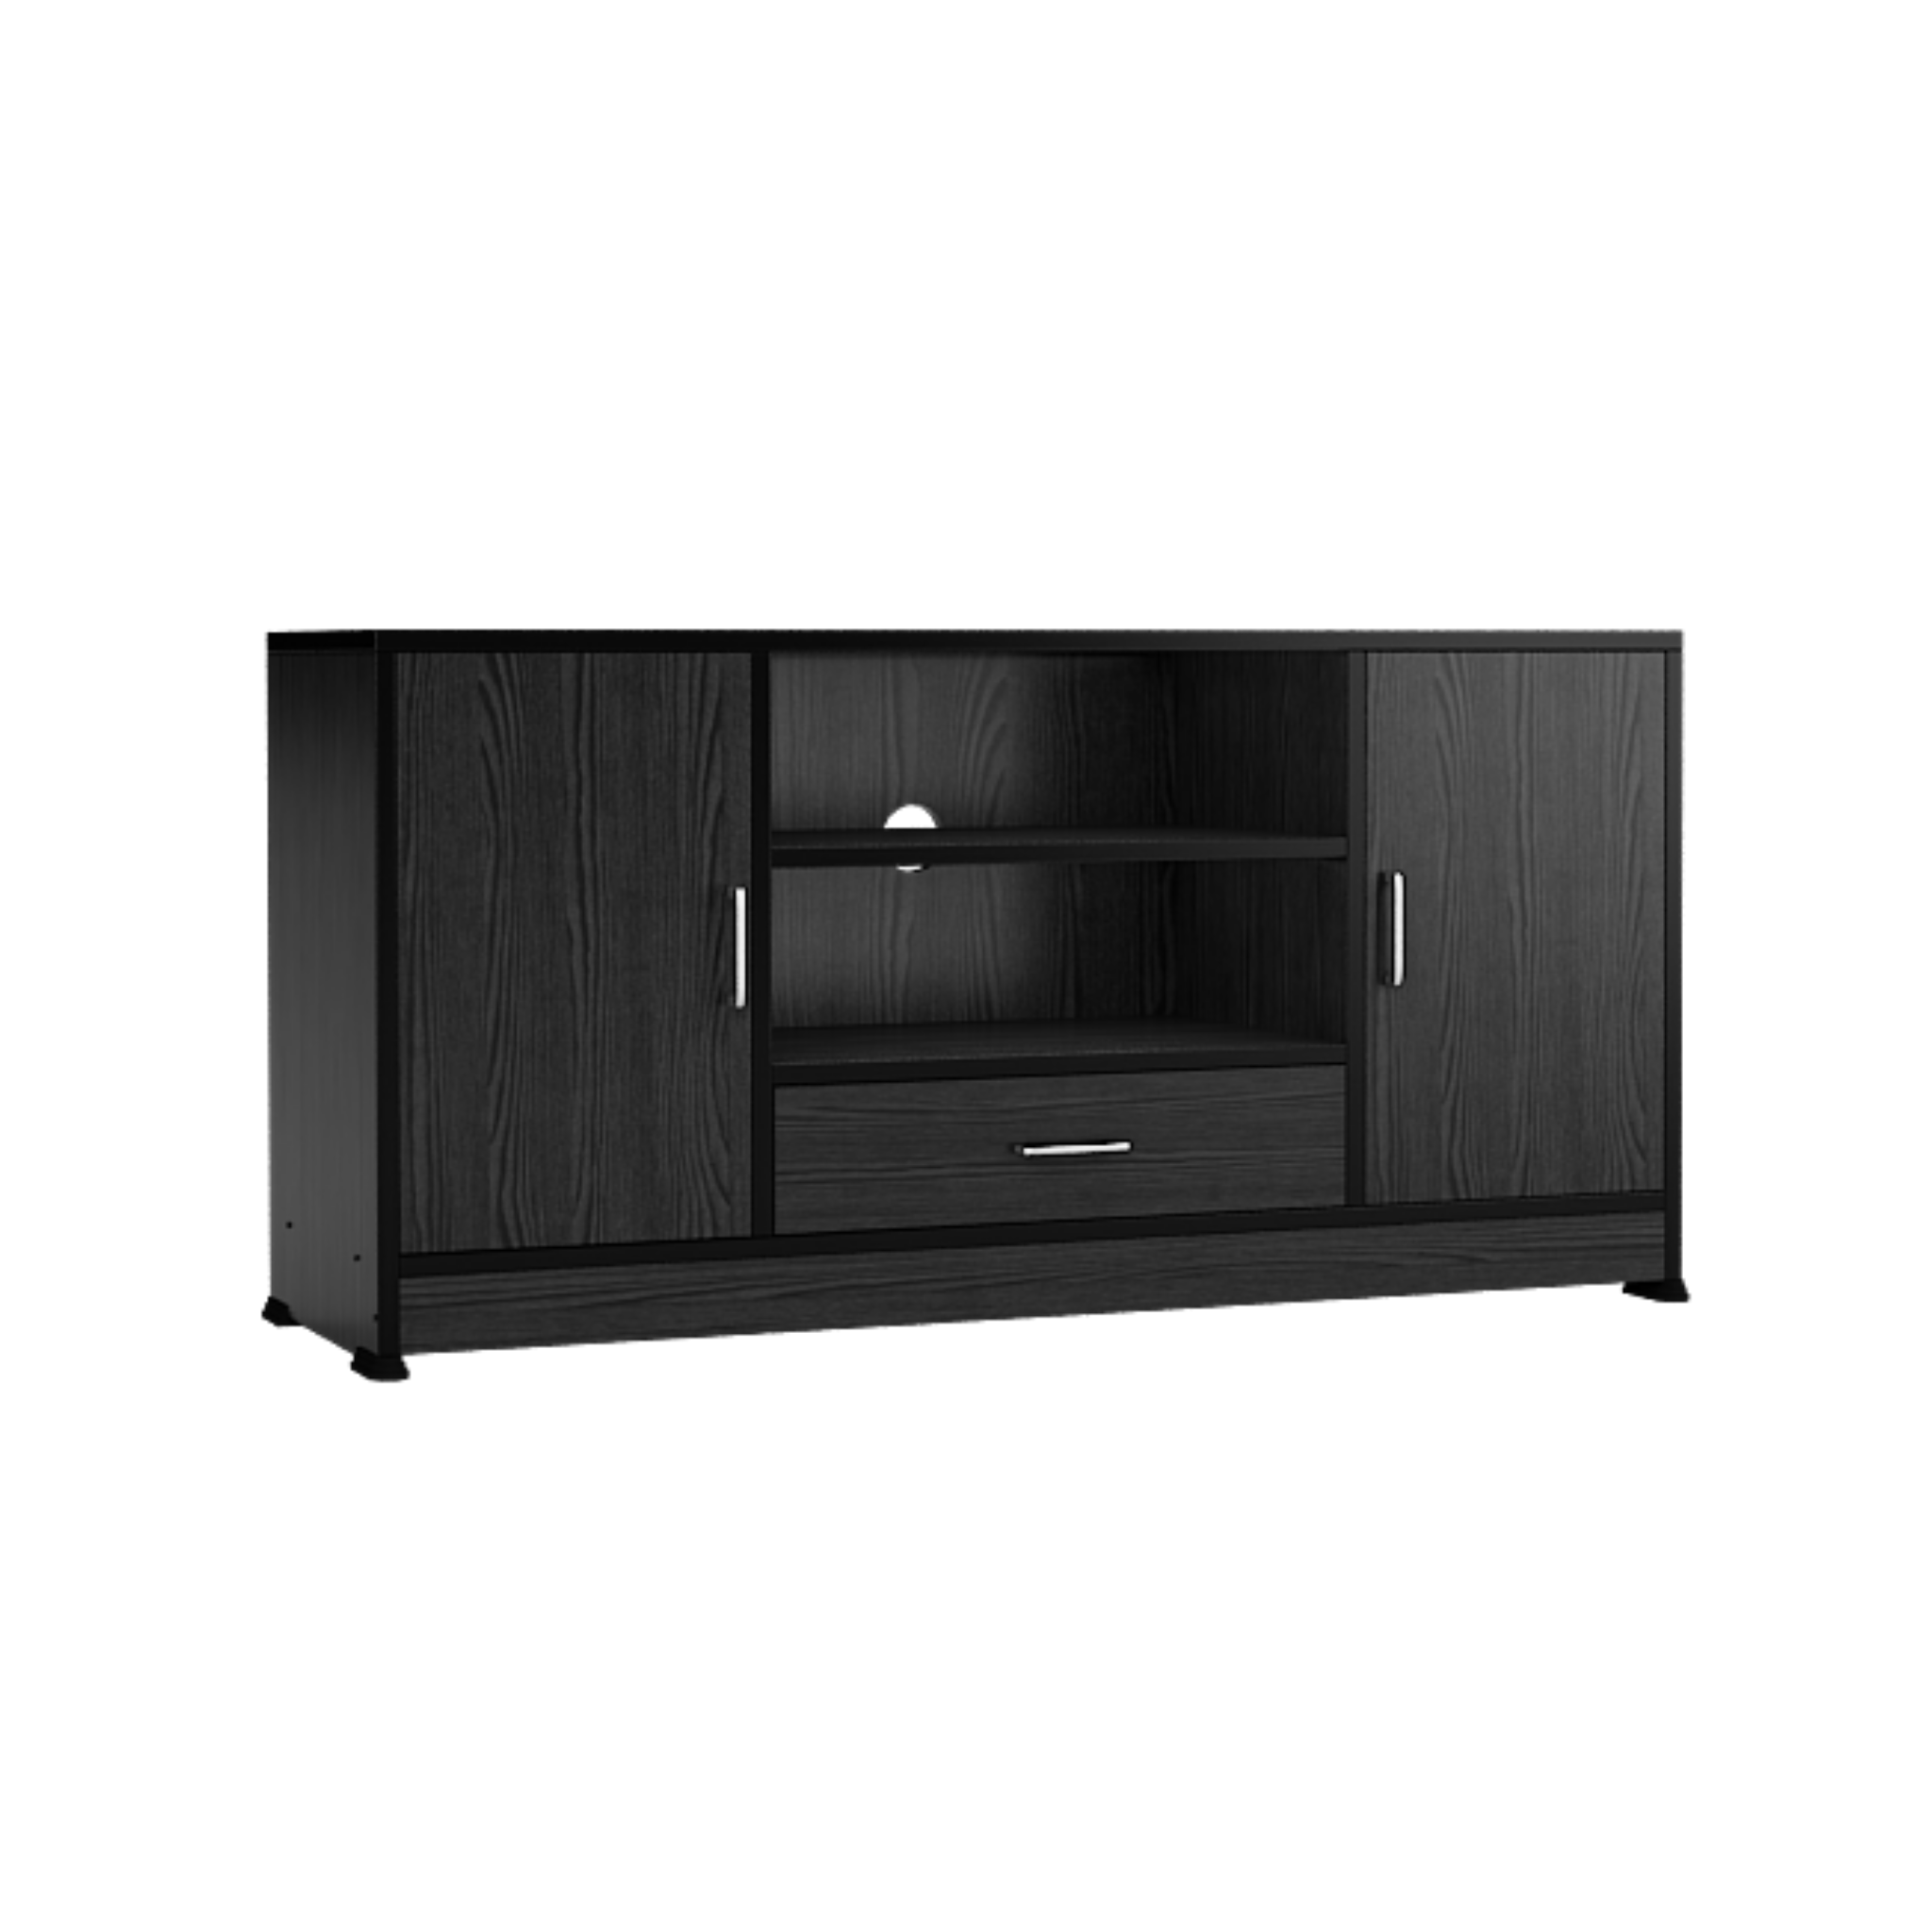 Free standing TV Unit with Cabinet Storage